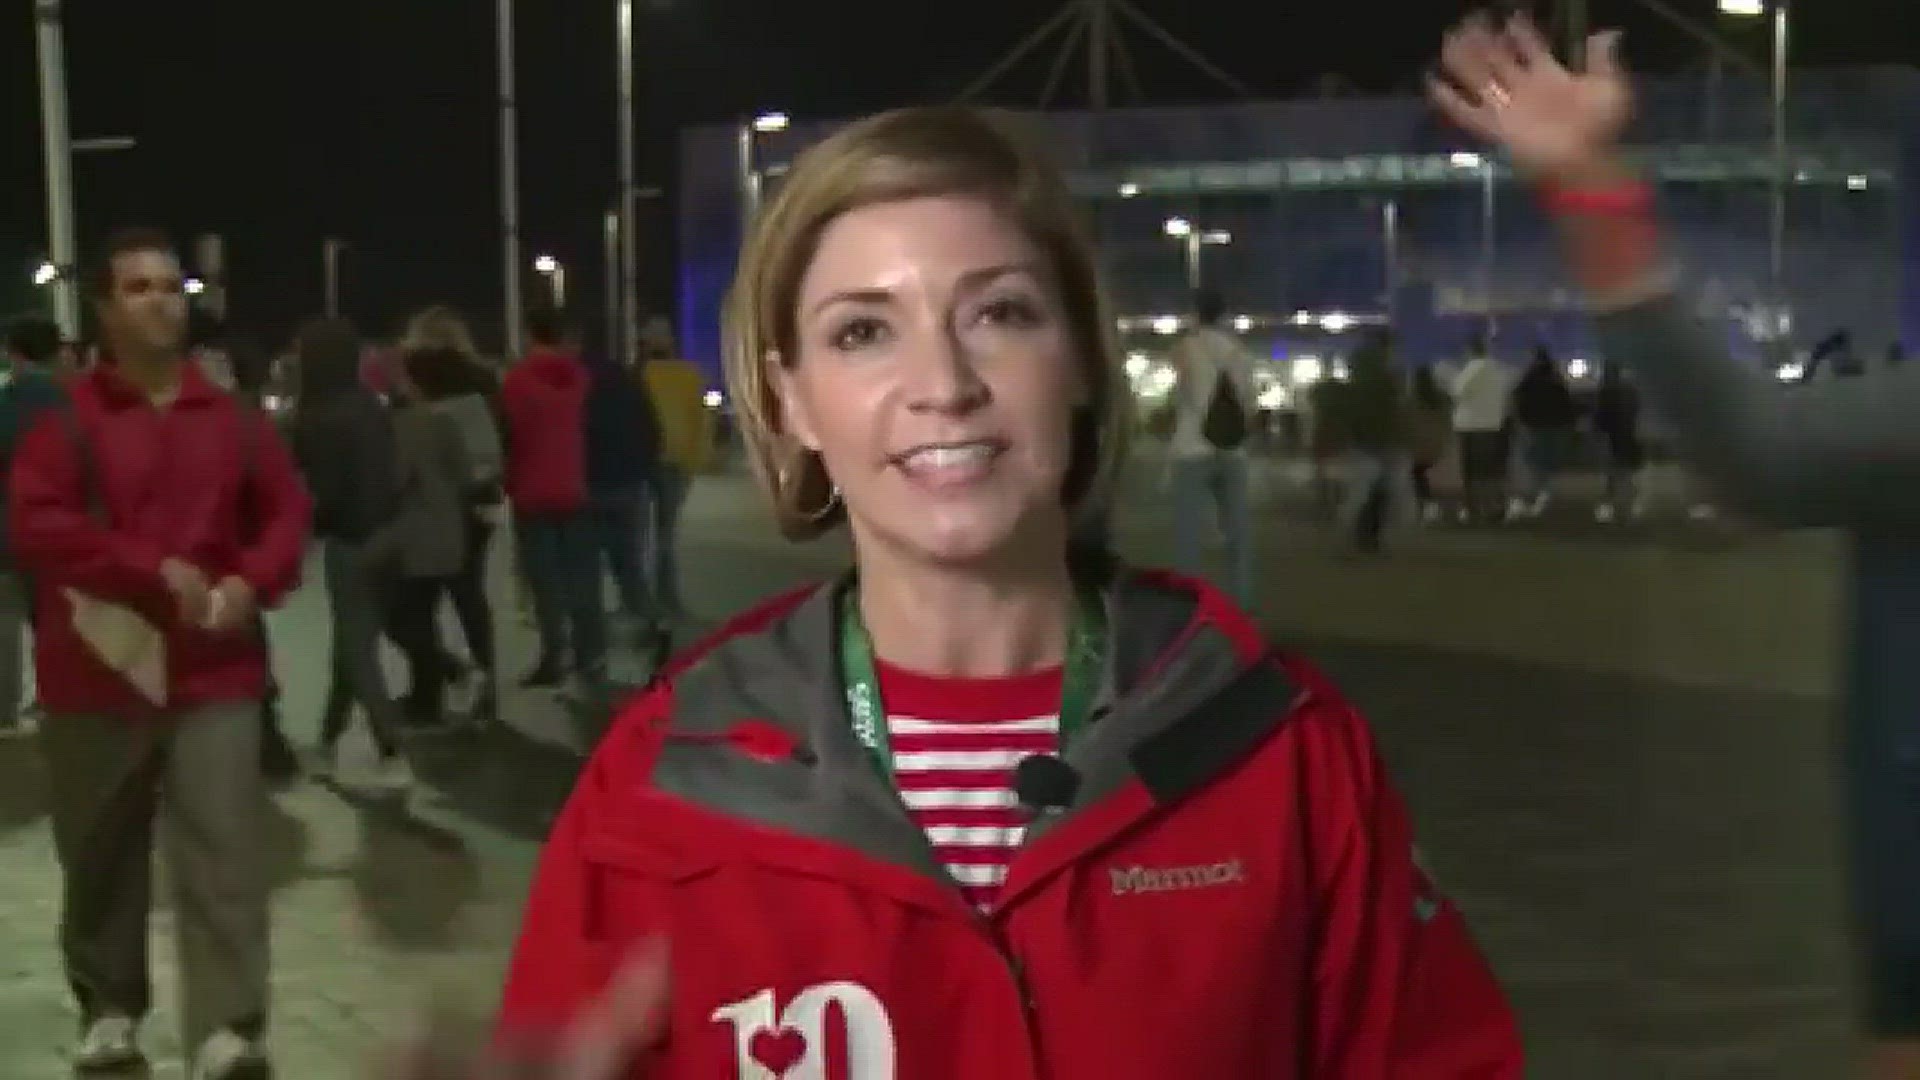 NBC Sports anchor Mike Tirico photobombed 10News anchor Robin Wilhoit while the two were in Rio de Janeiro covering the Summer Olympics.